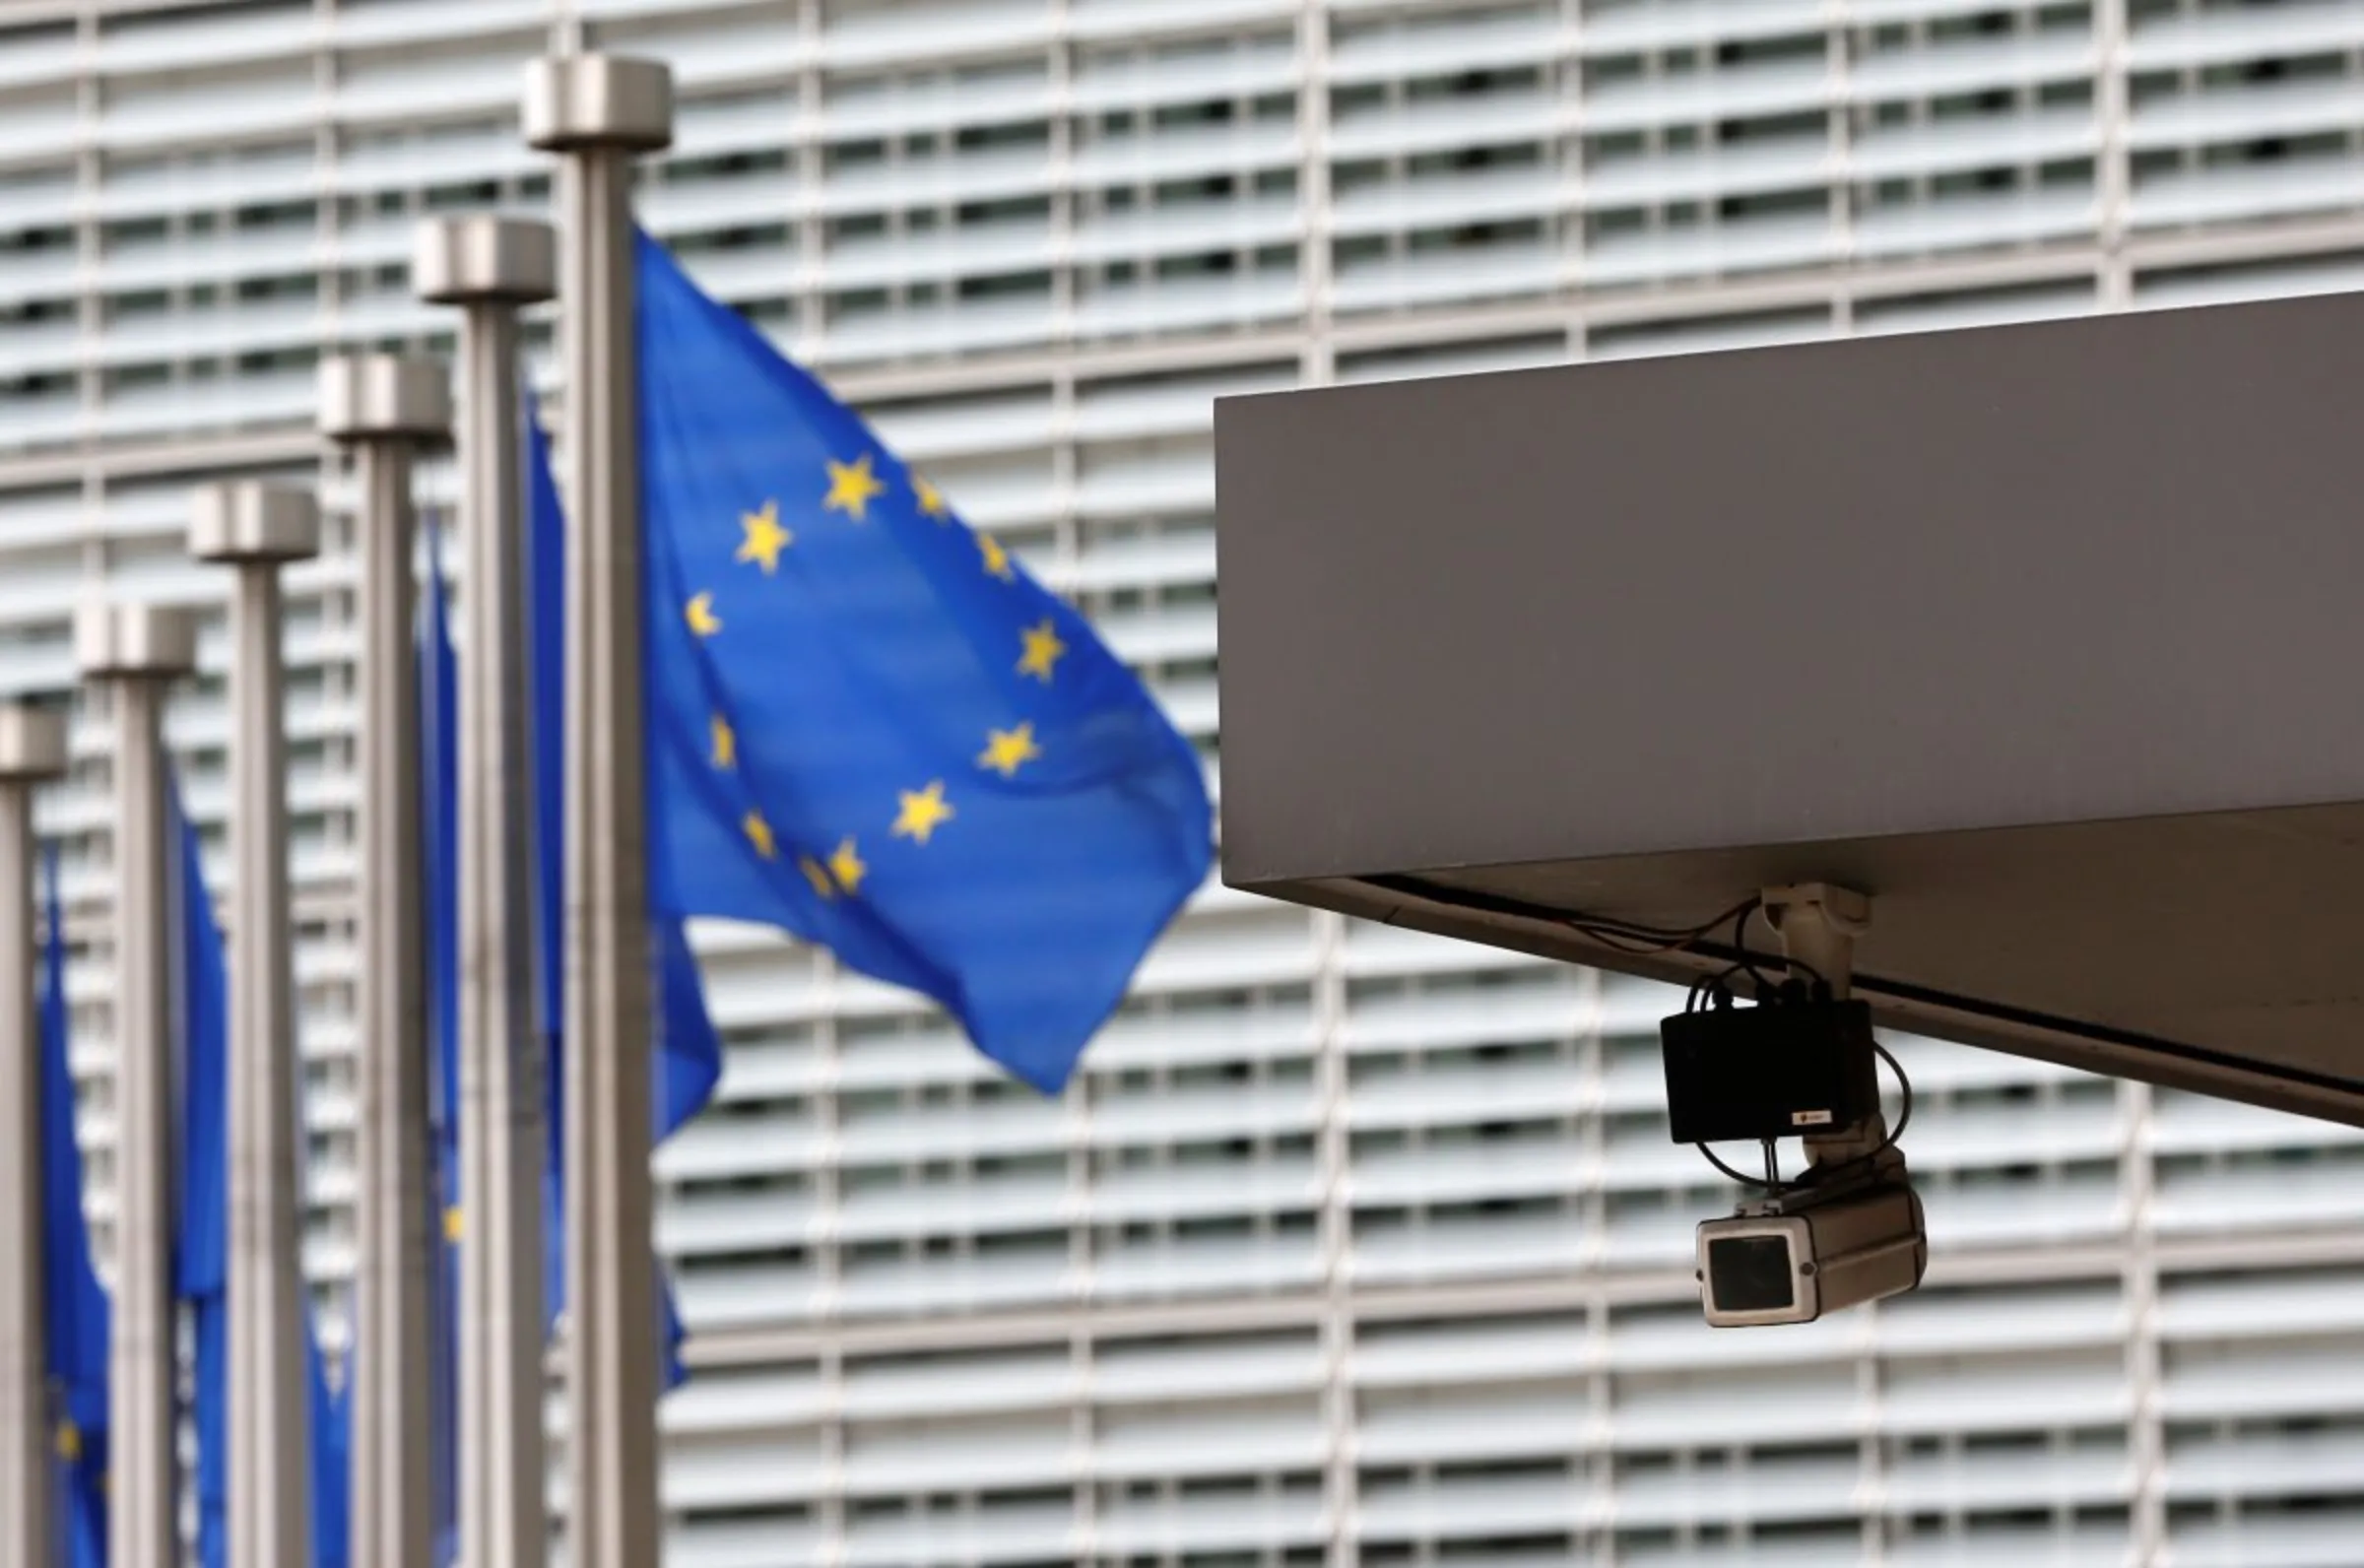 A security camera is seen at the main entrance of the European Union Commission headquarters in Brussels July 1, 2013. REUTERS/Francois Lenoir